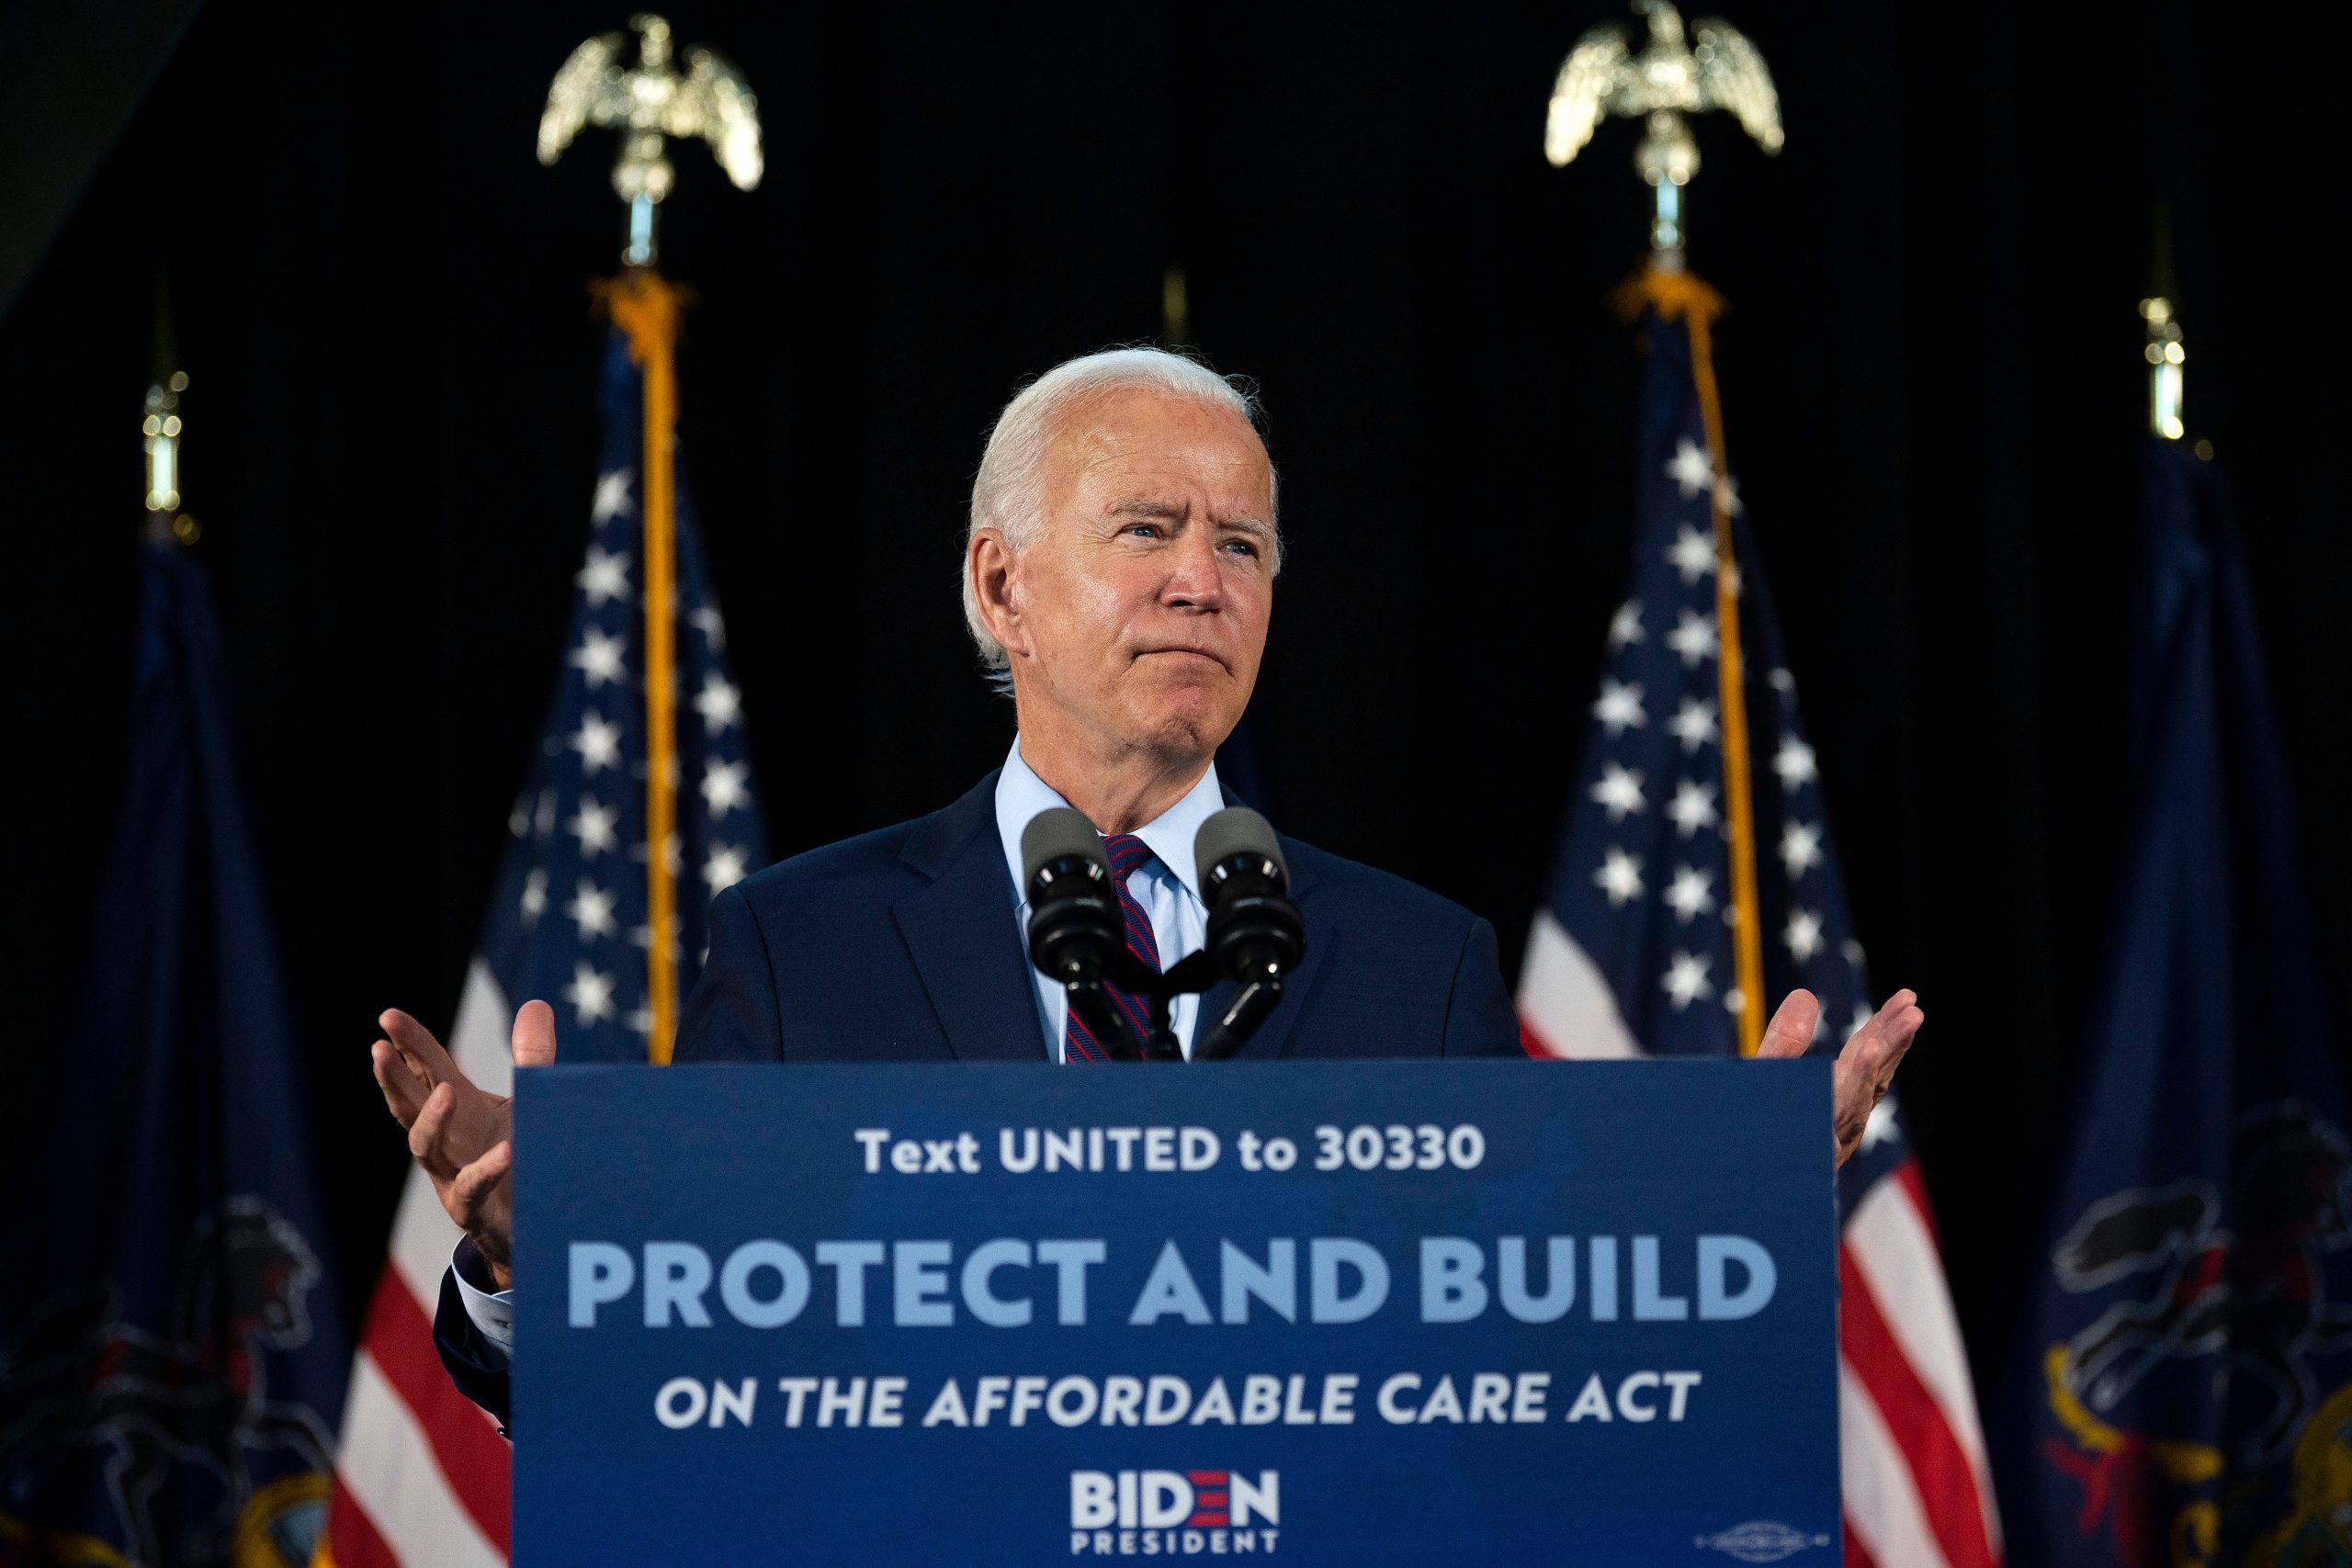 Trump wants in the midst of a pandemic at the end Care. This is a great gift Biden